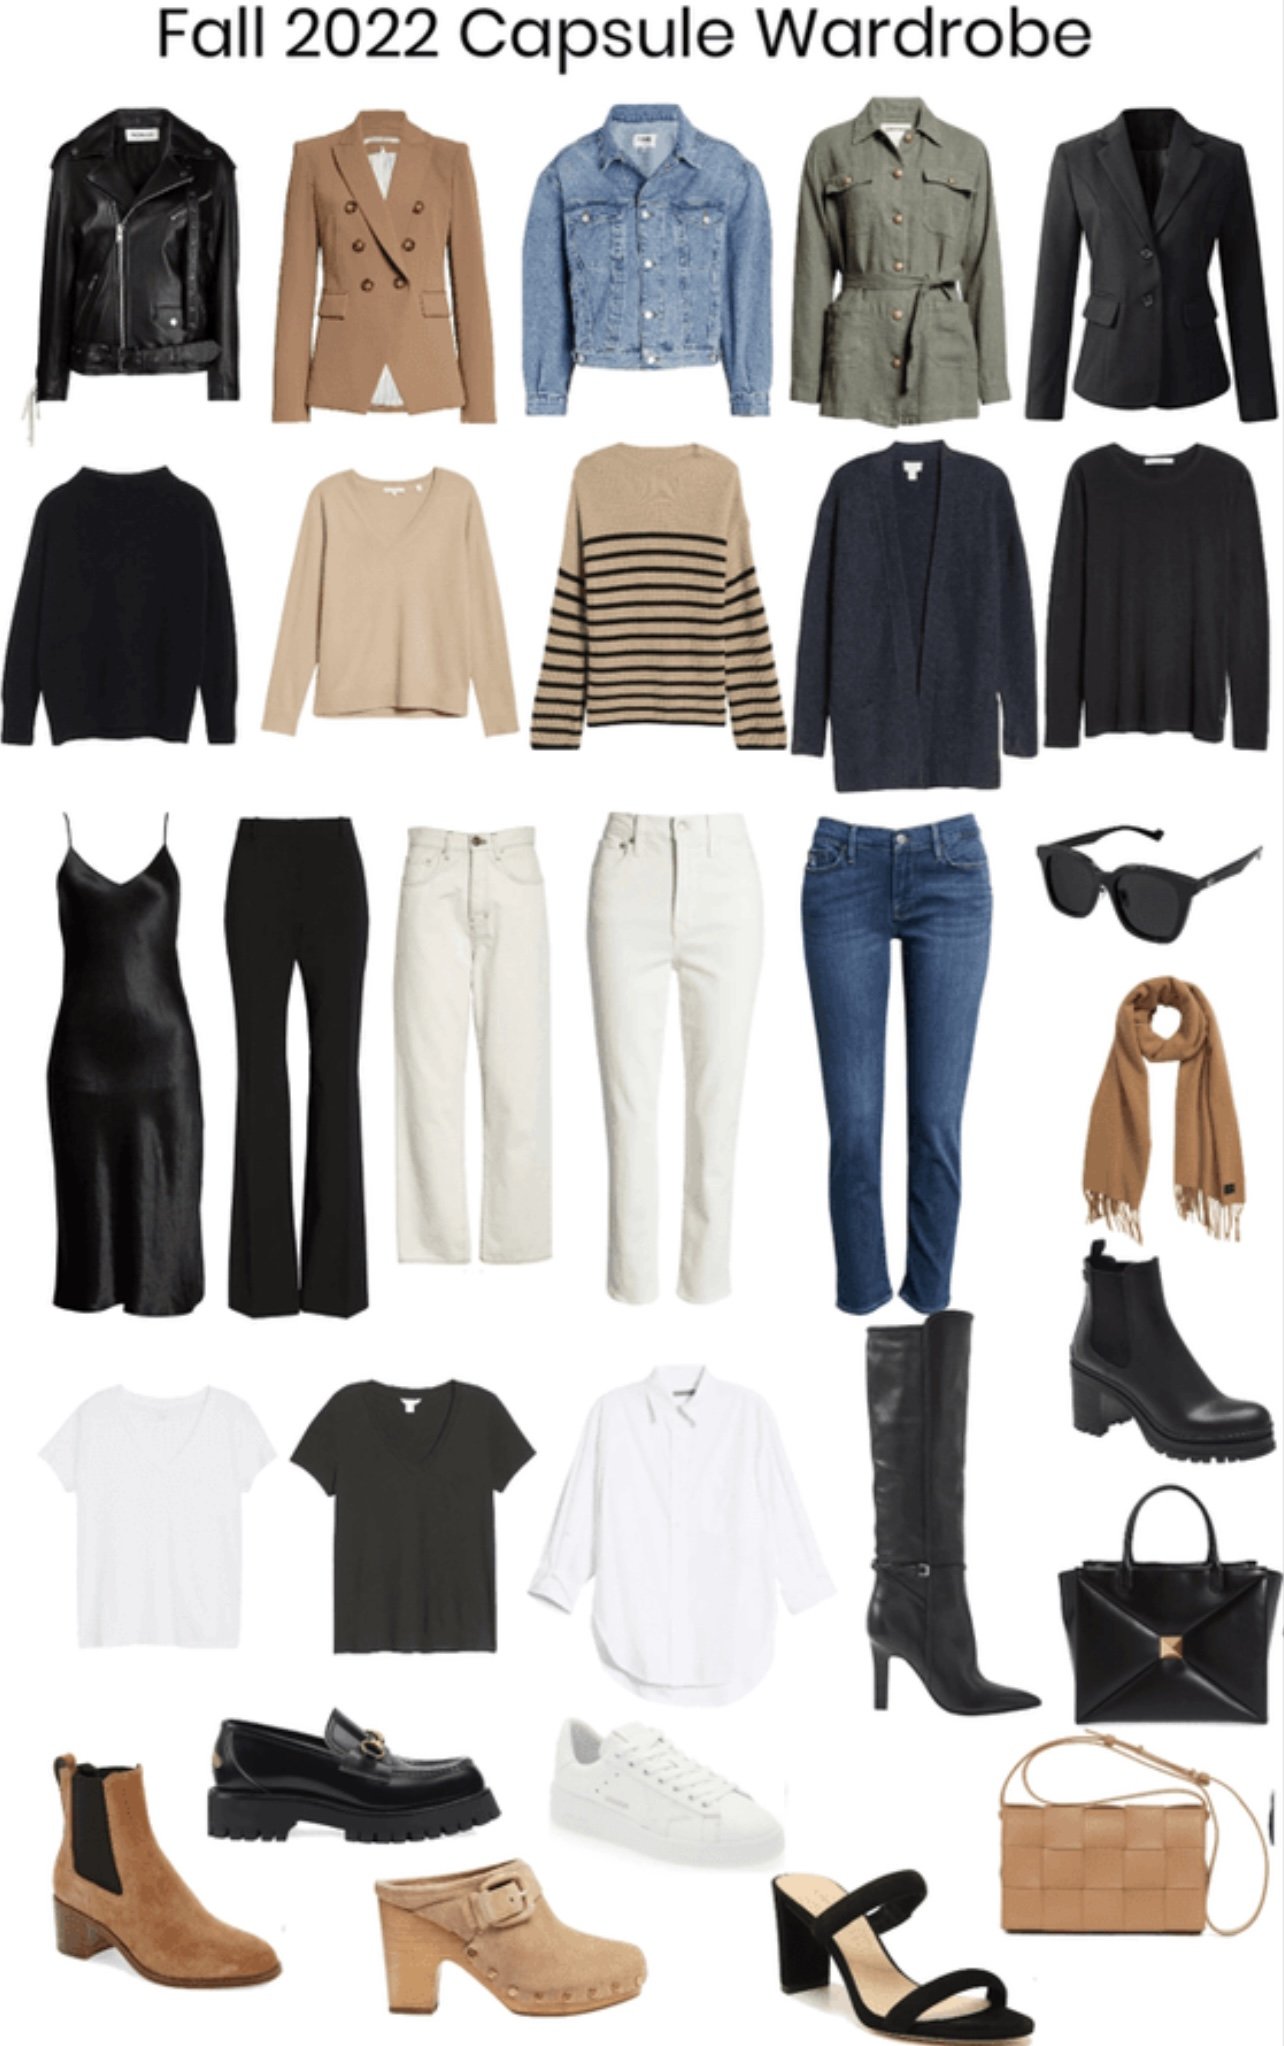 Fall Fashion Made Easy - My 30 Piece Capsule Wardrobe Pieces + 22